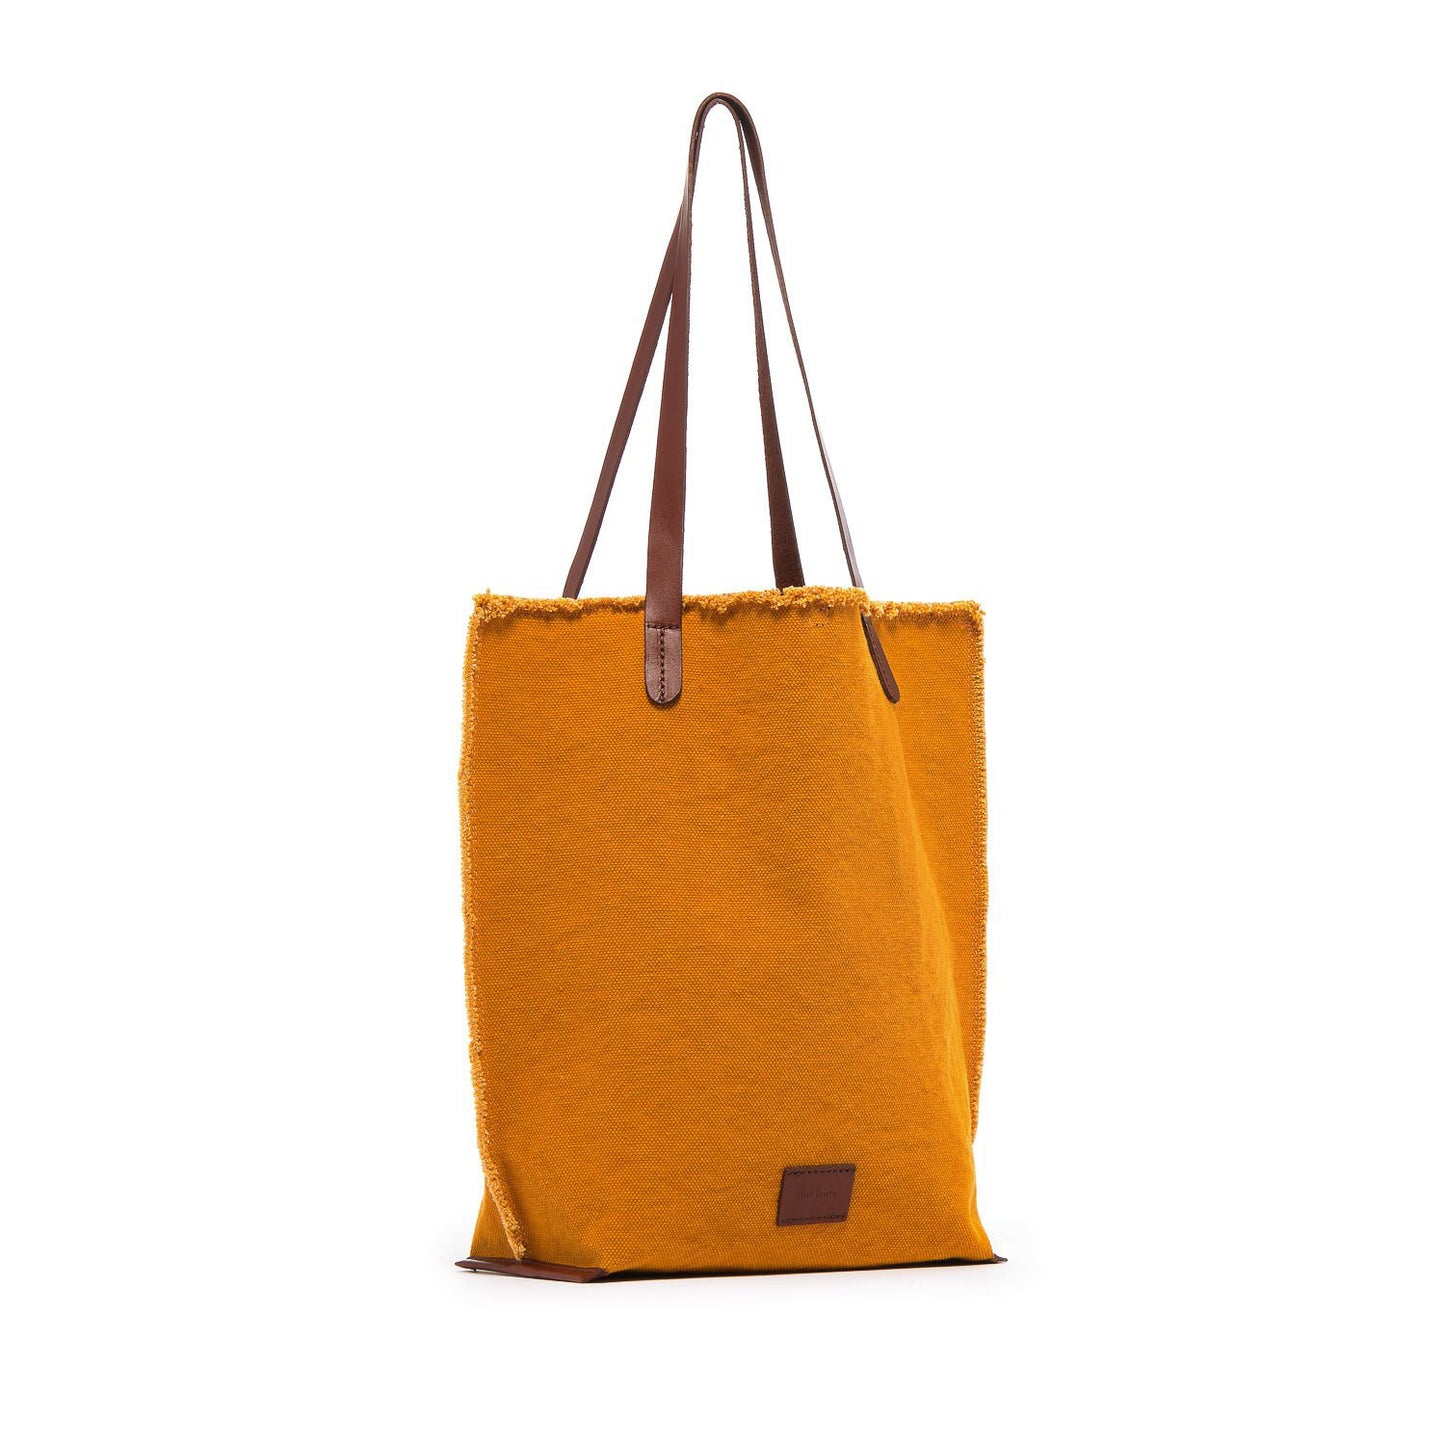 Mery Tote Bag Yellow Canvas & Tan Leather